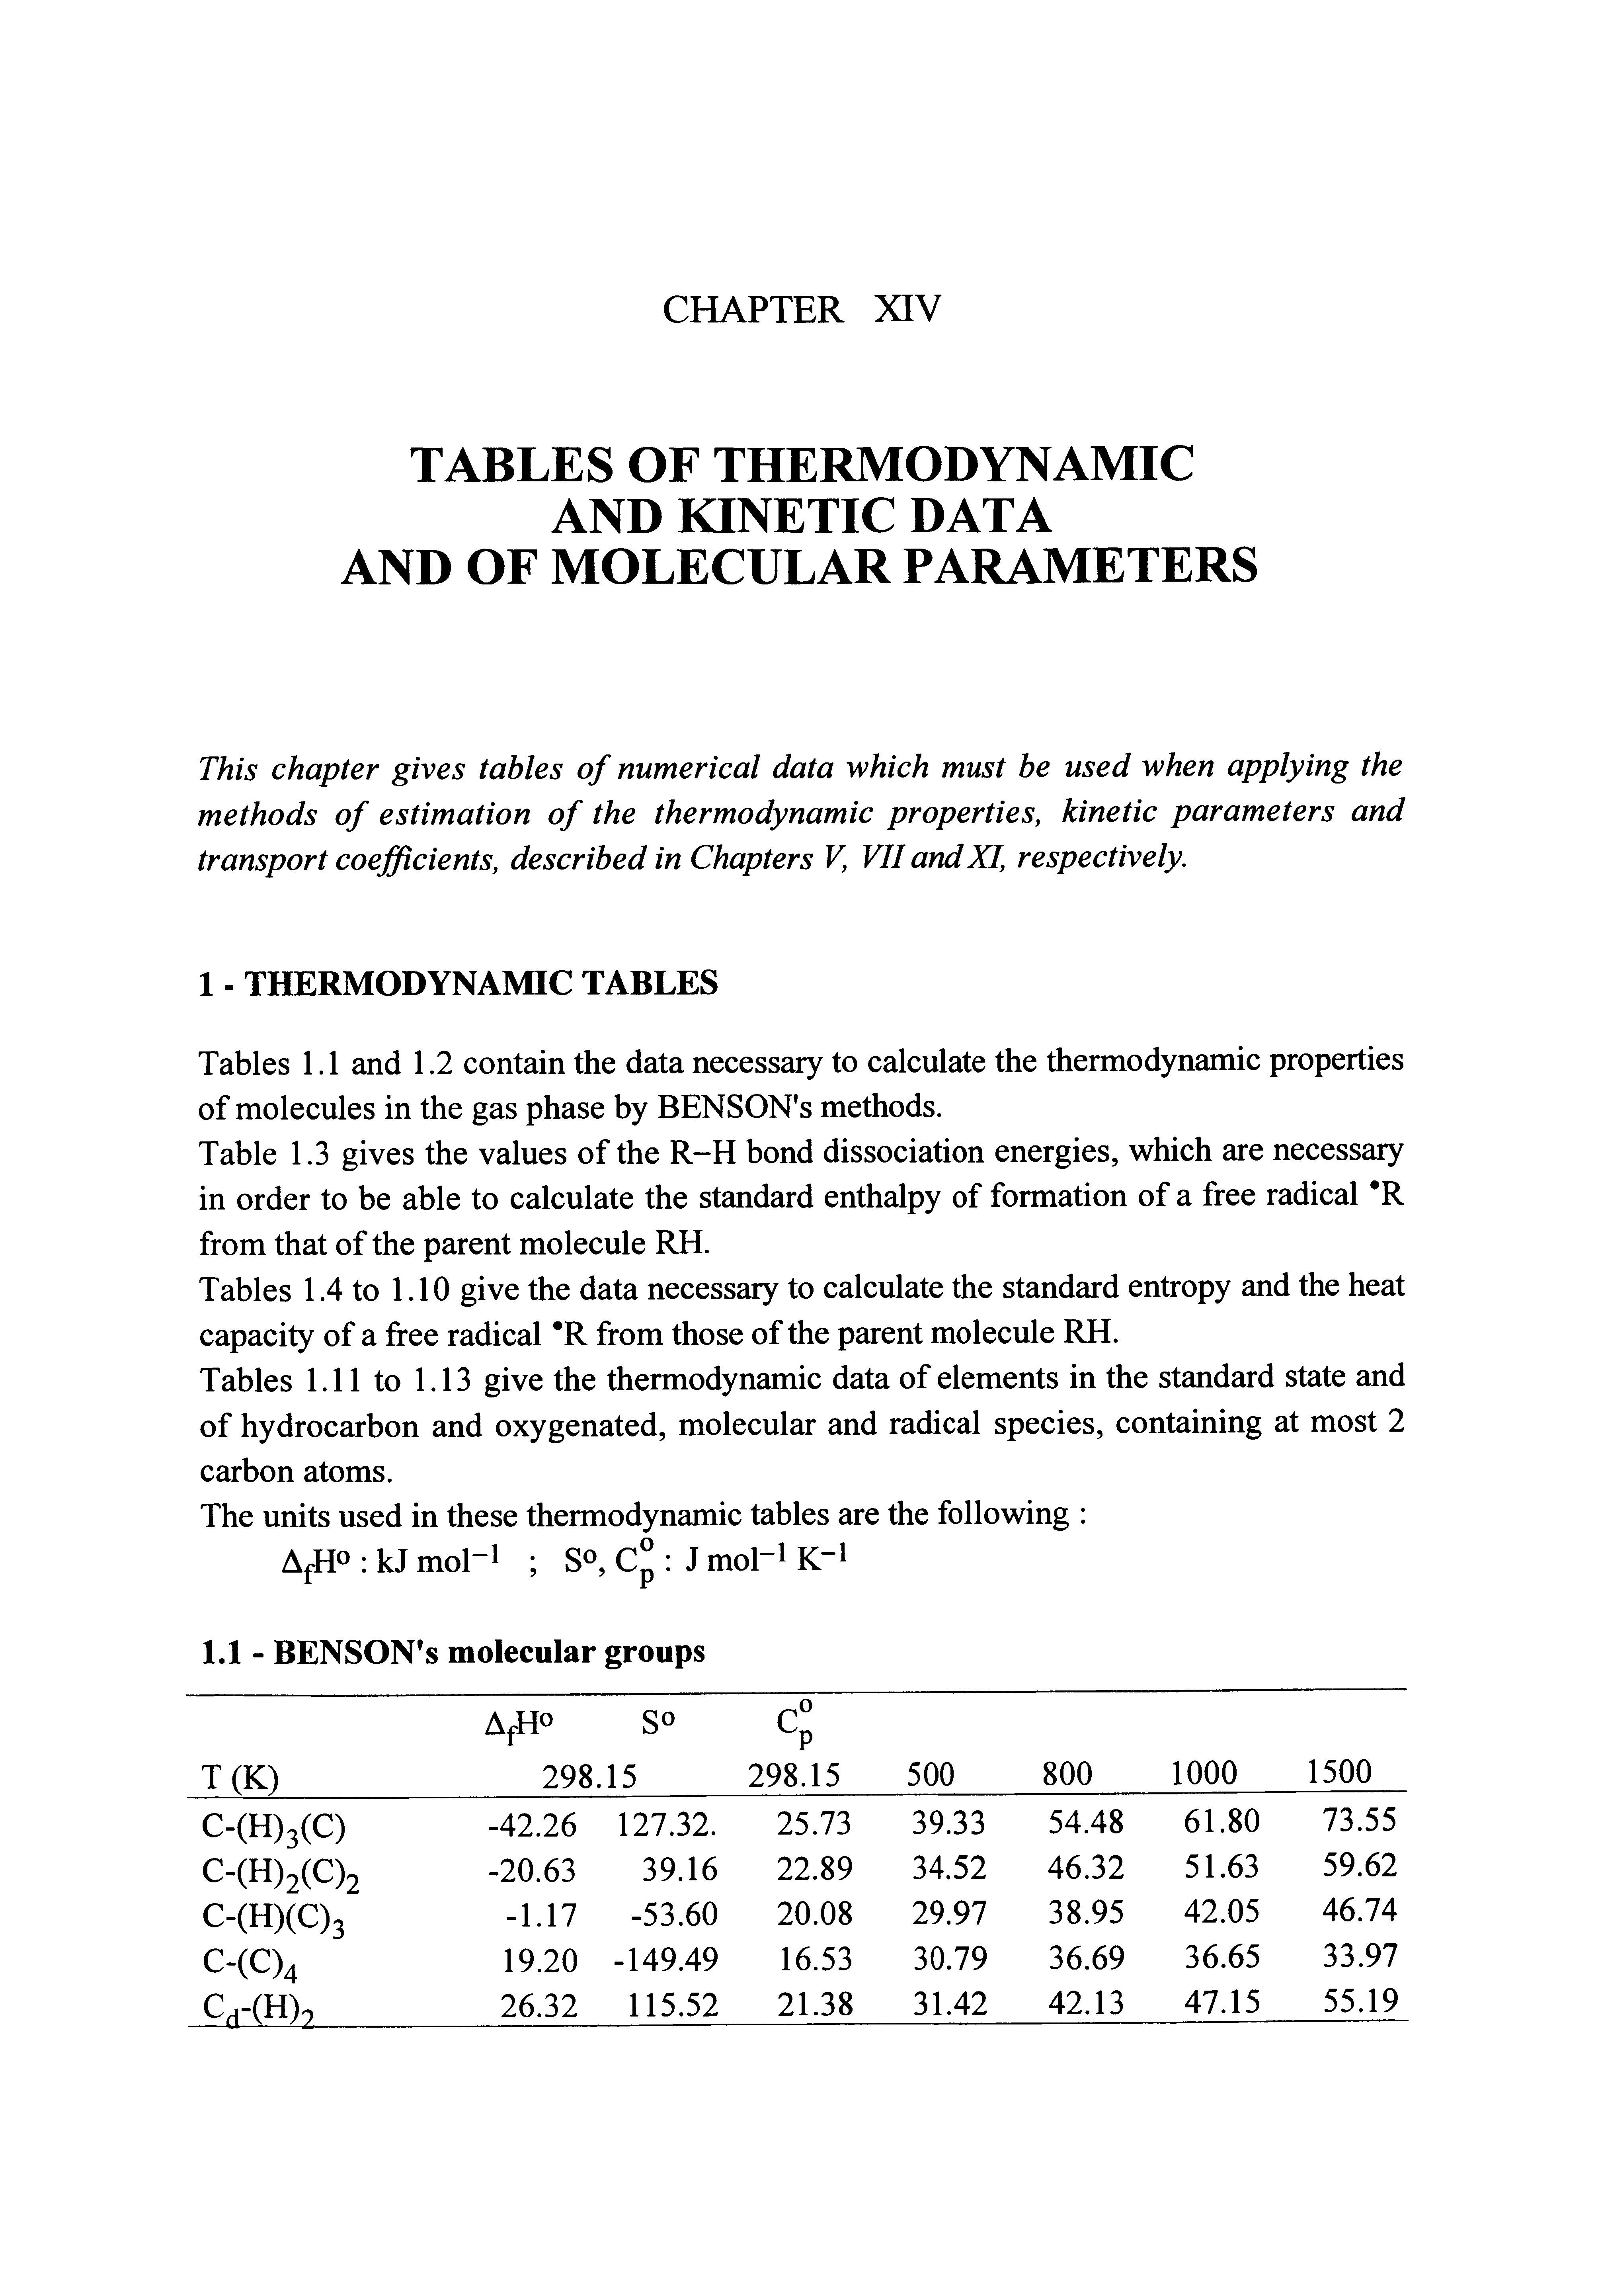 Tables 1.11 to 1.13 give the thermodynamic data of elements in the standard state and of hydrocarbon and oxygenated, molecular and radical species, containing at most 2 carbon atoms.